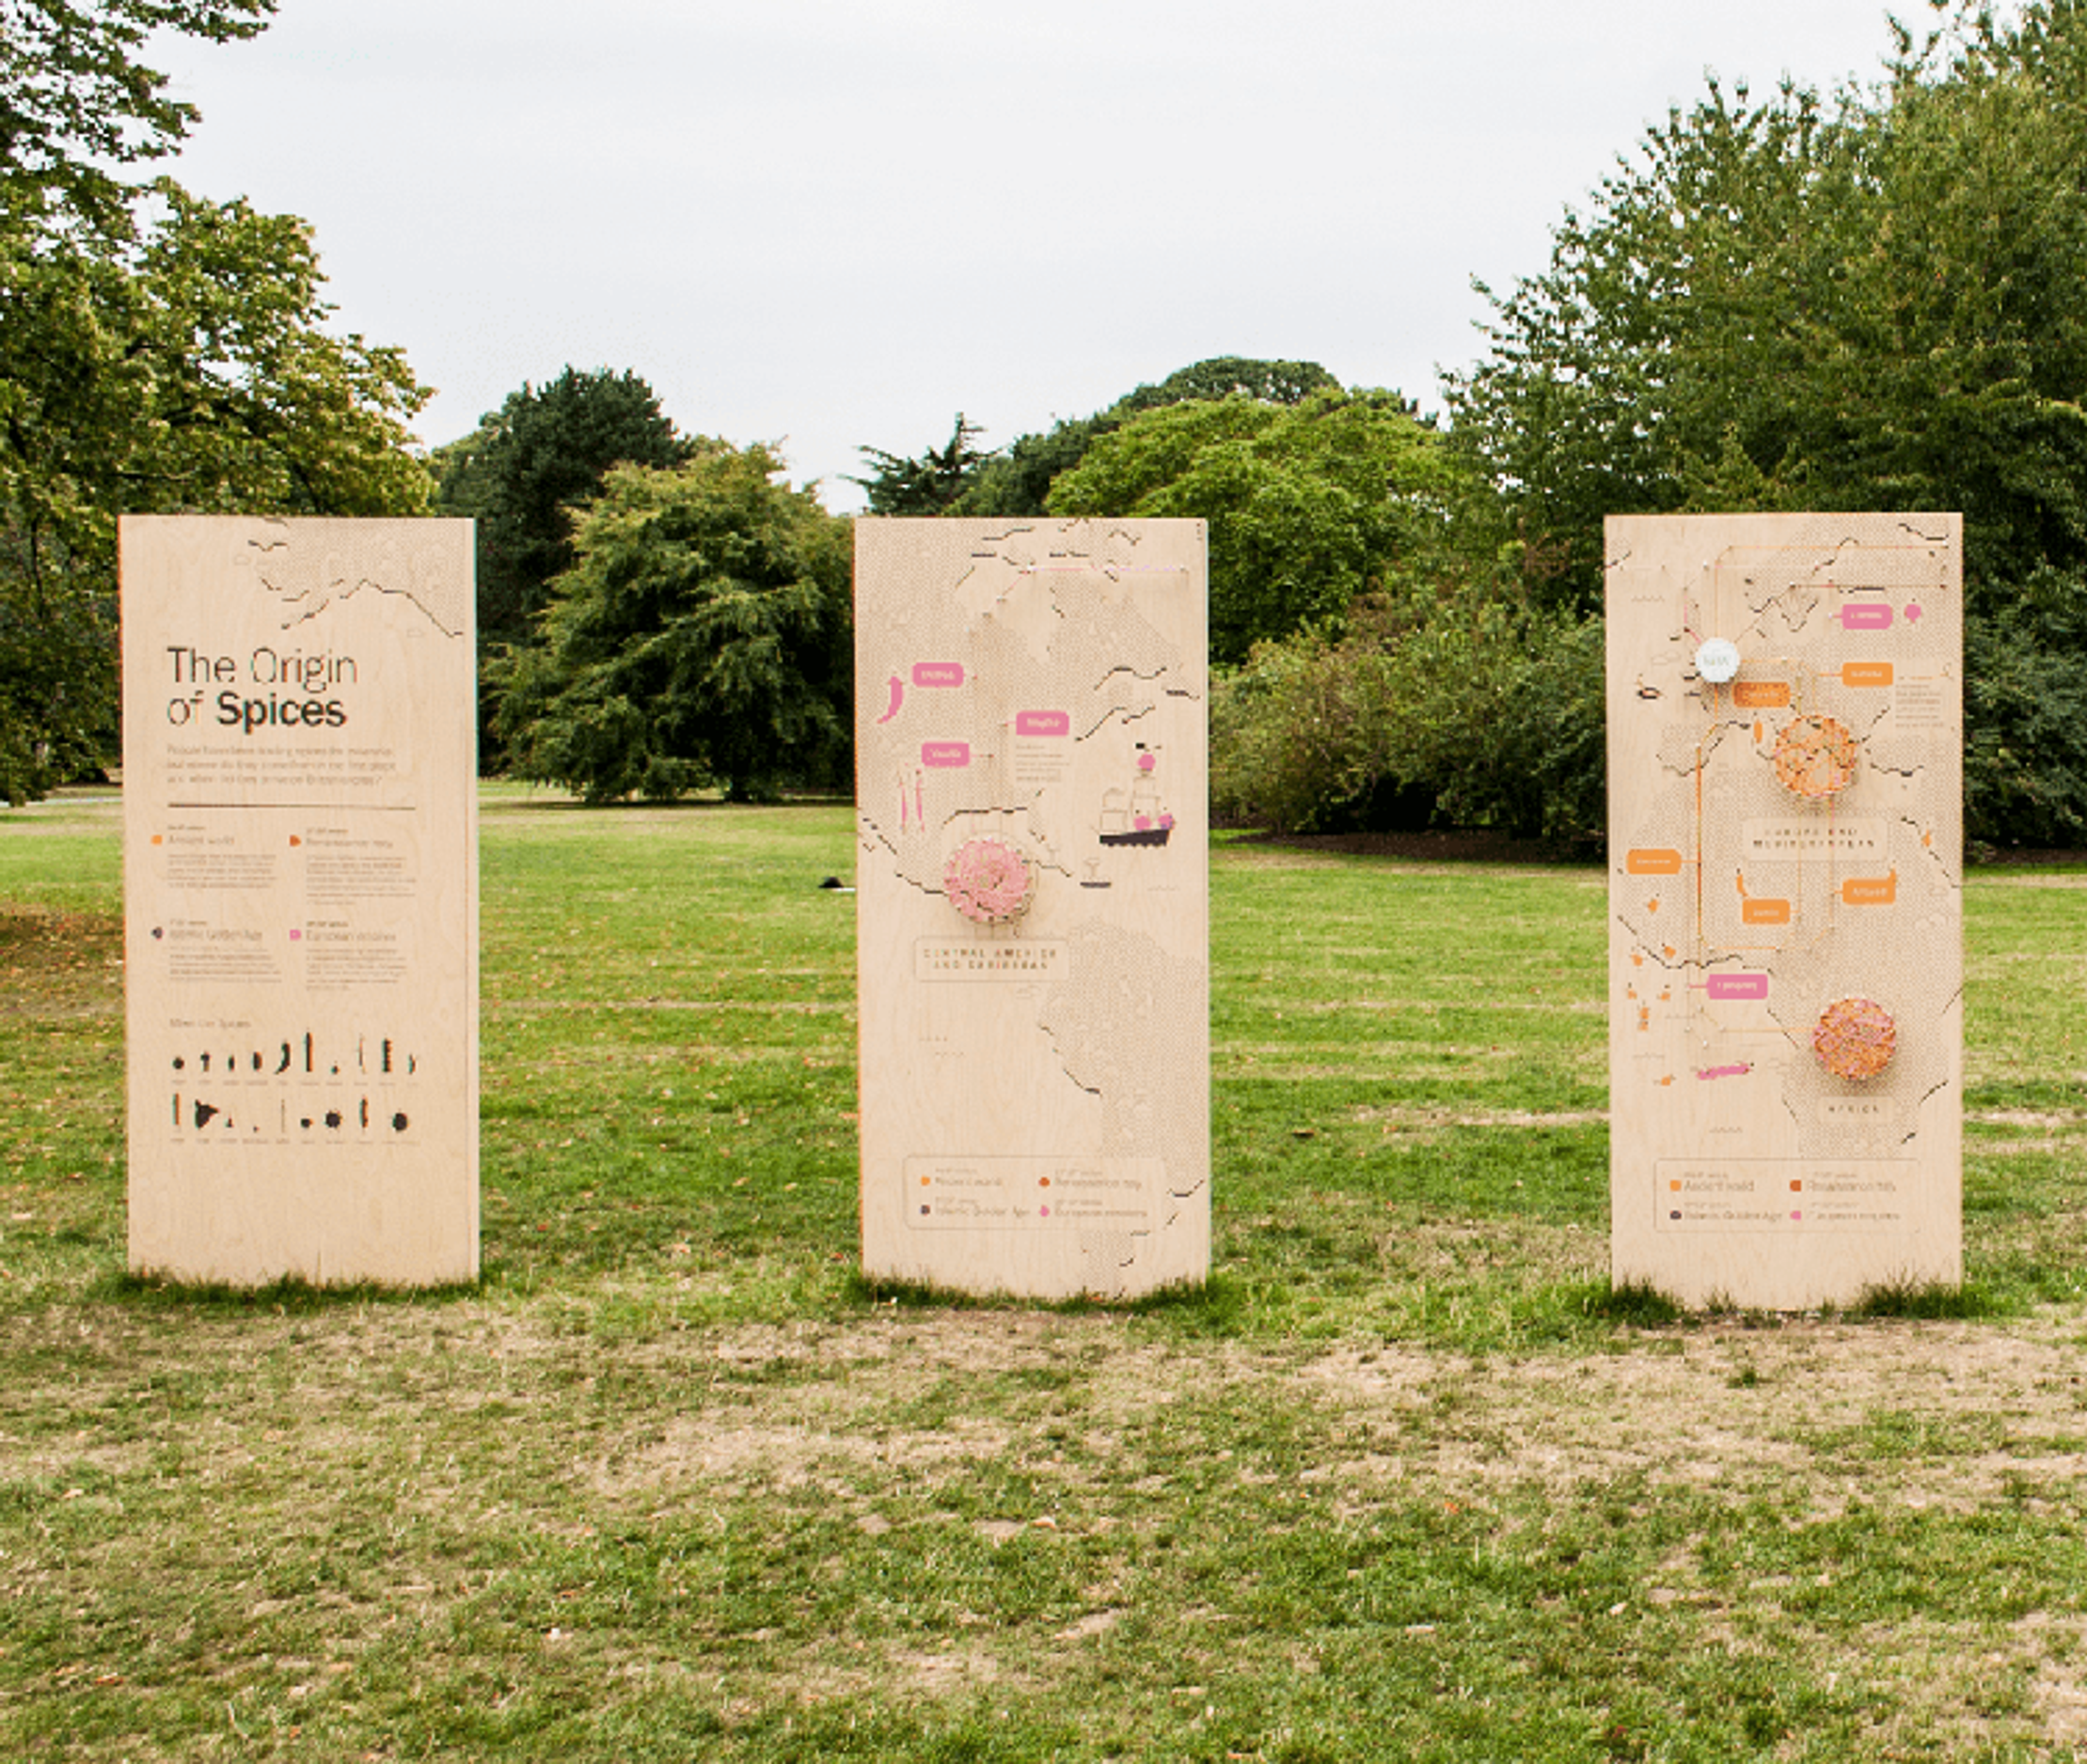 A photo of three wooden monoliths showing the origin of spices map as they were displayed outdoors at Kew Gardens.